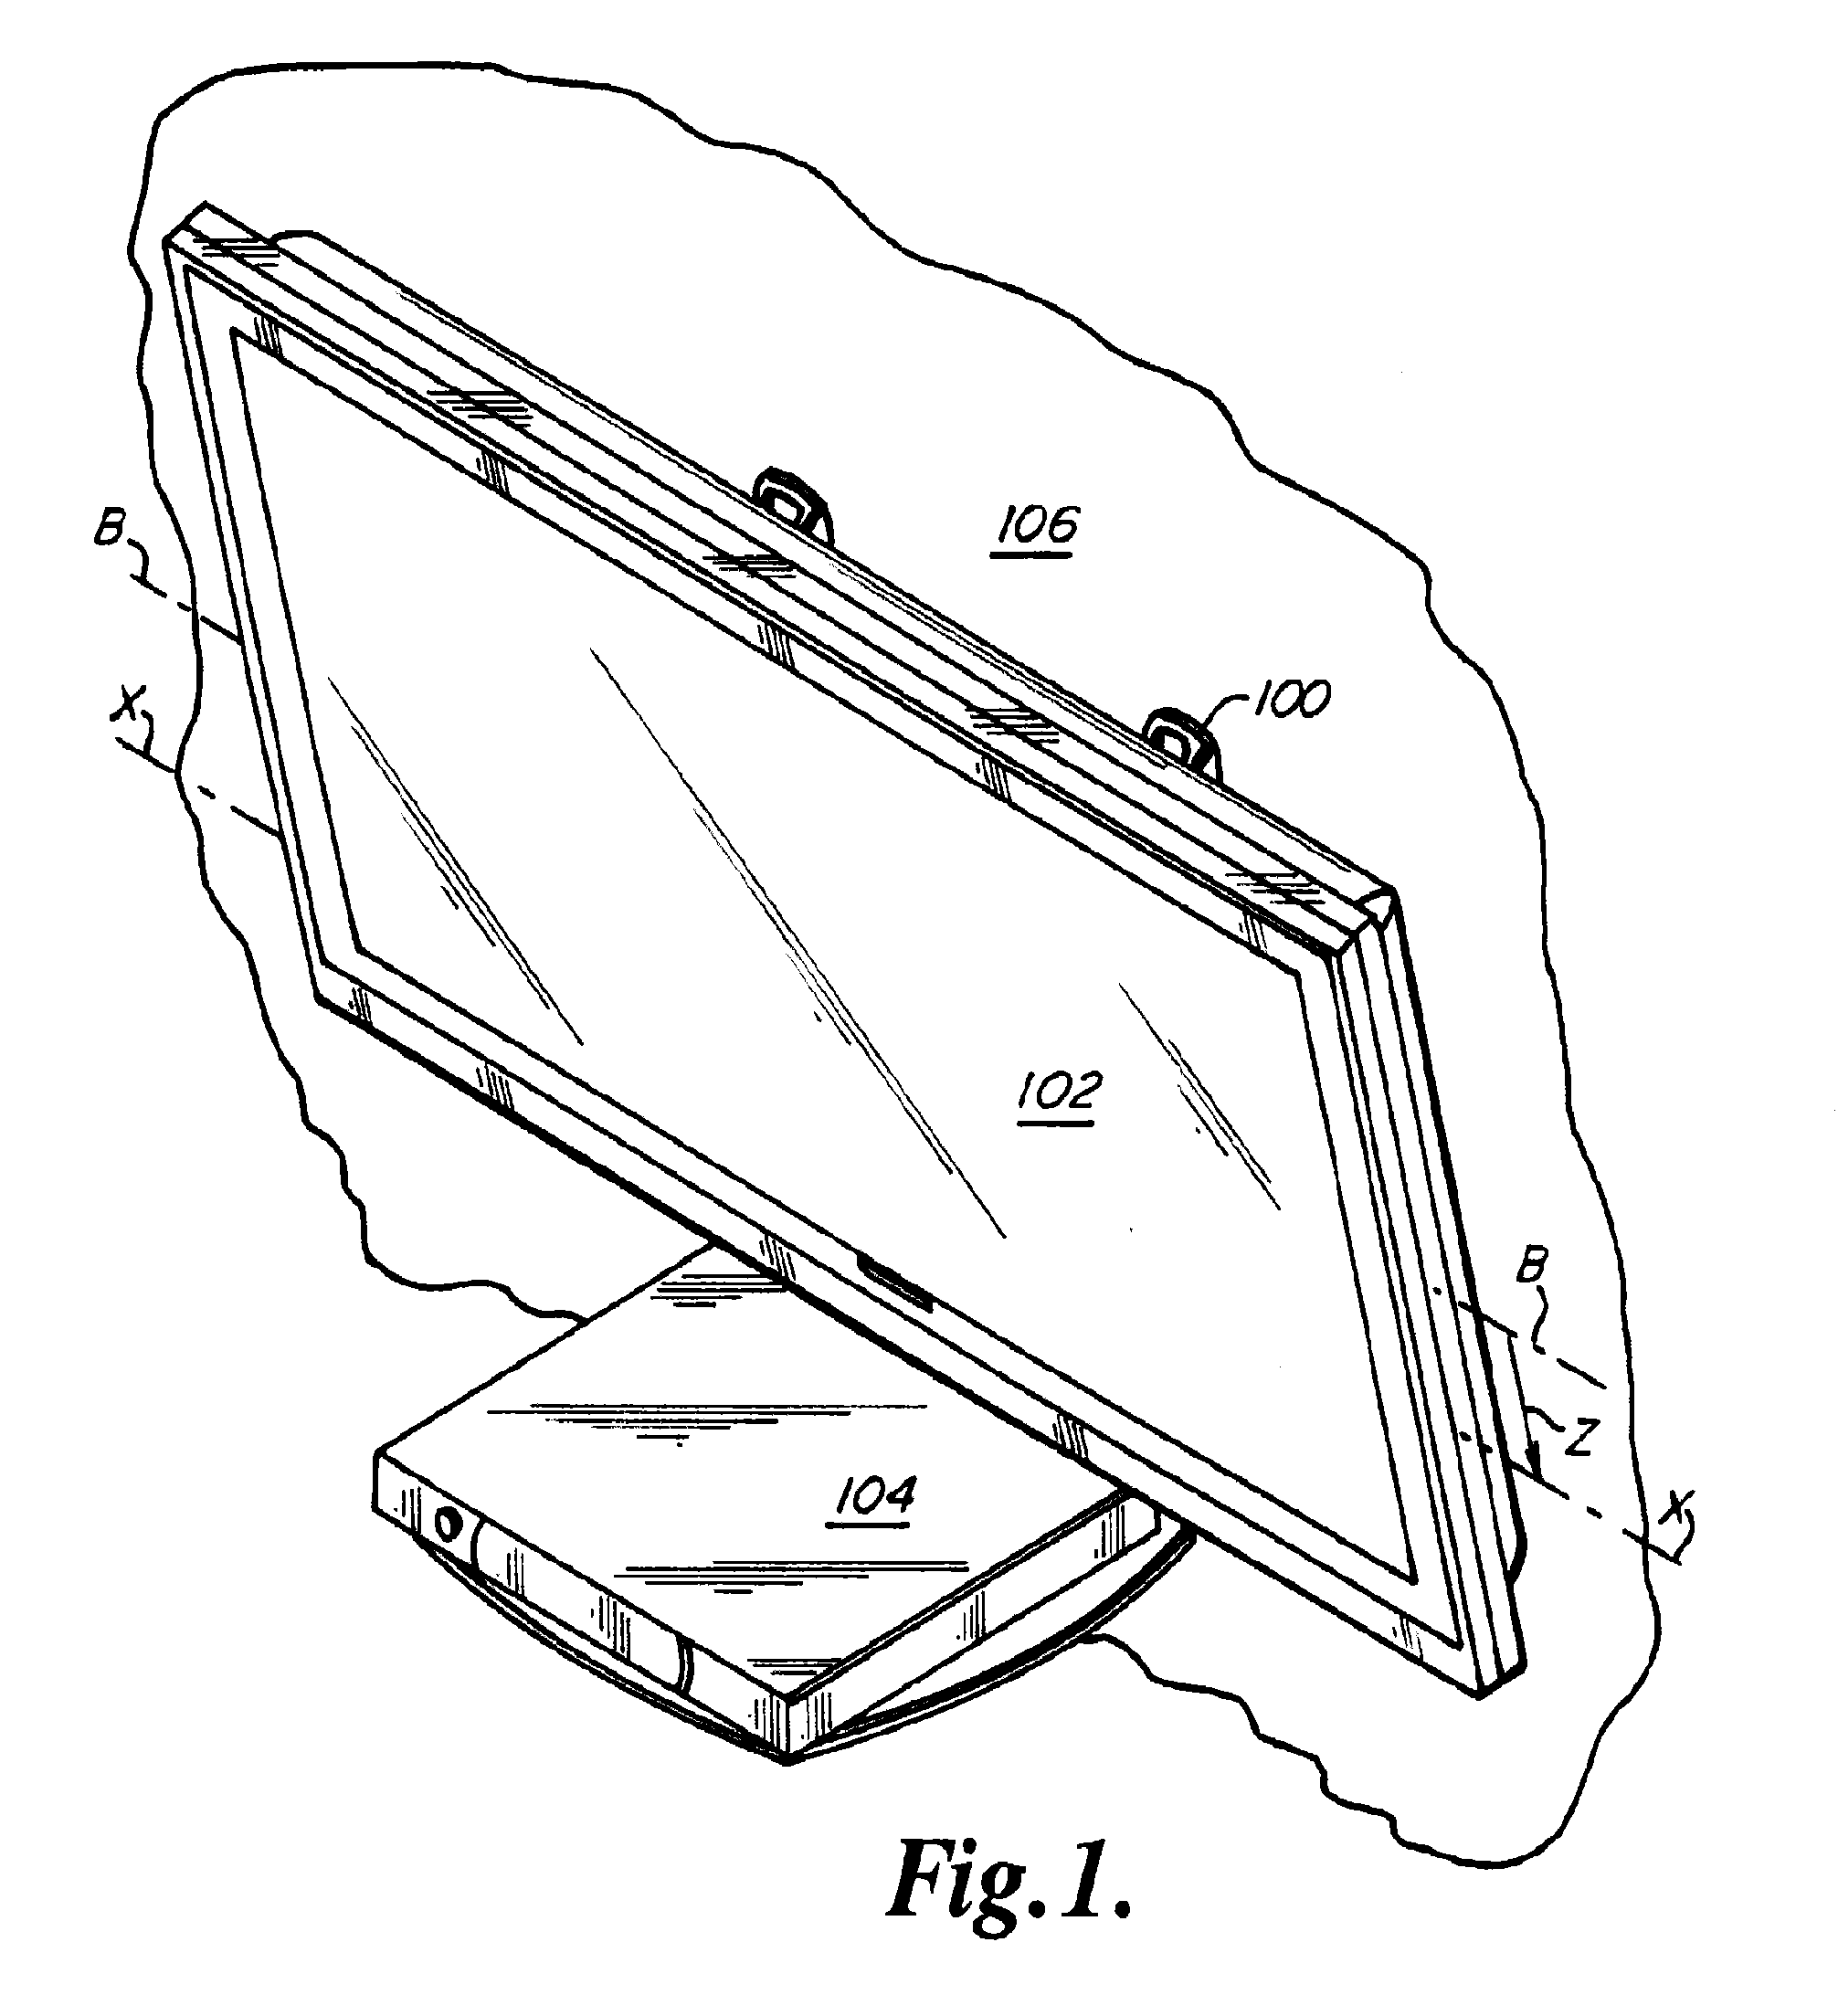 Display mount with post-installation adjustment features